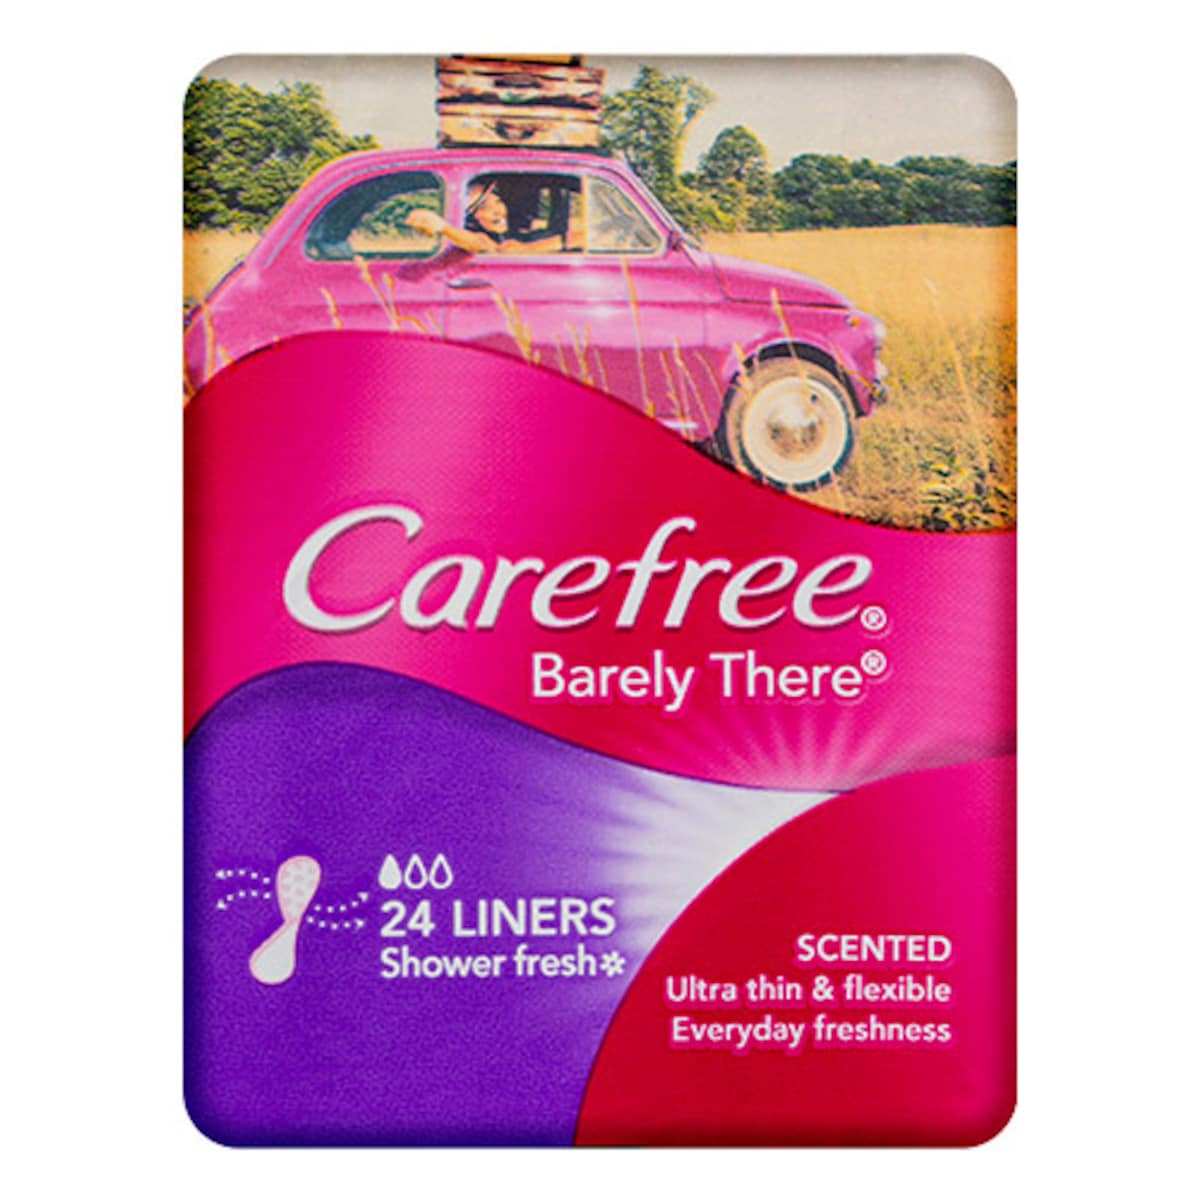 Carefree Barely There Liners Shower Fresh 24 Pack